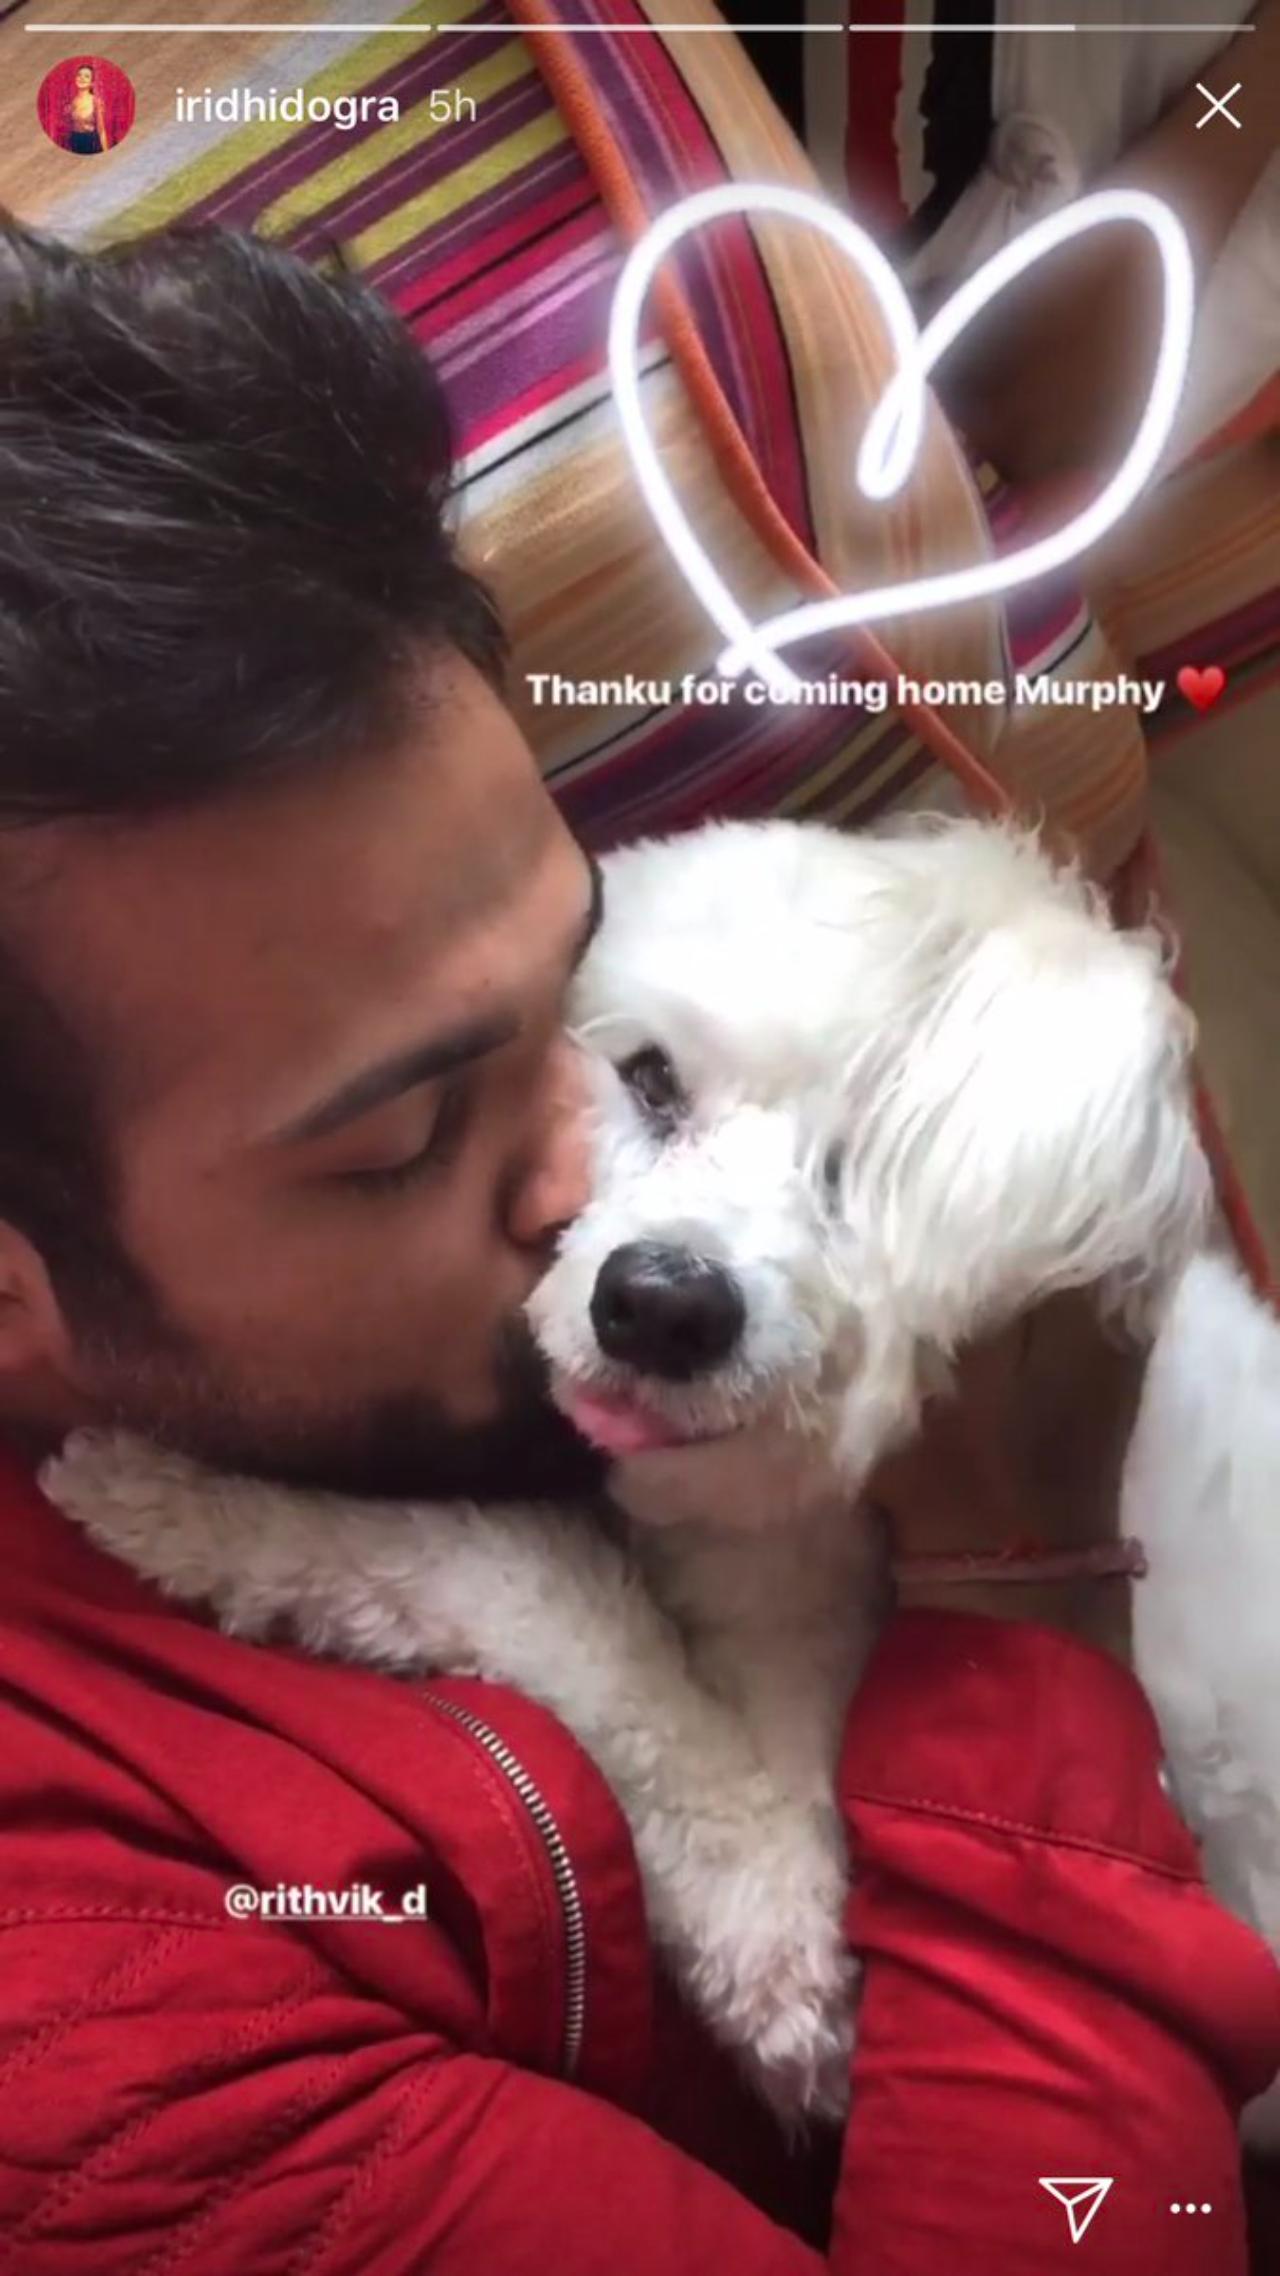 Both Murphey and Eve hold a significant place in his heart, and he adores them immensely. Rithvik's pets are an integral and cherished part of his life, and he finds immense joy in their company